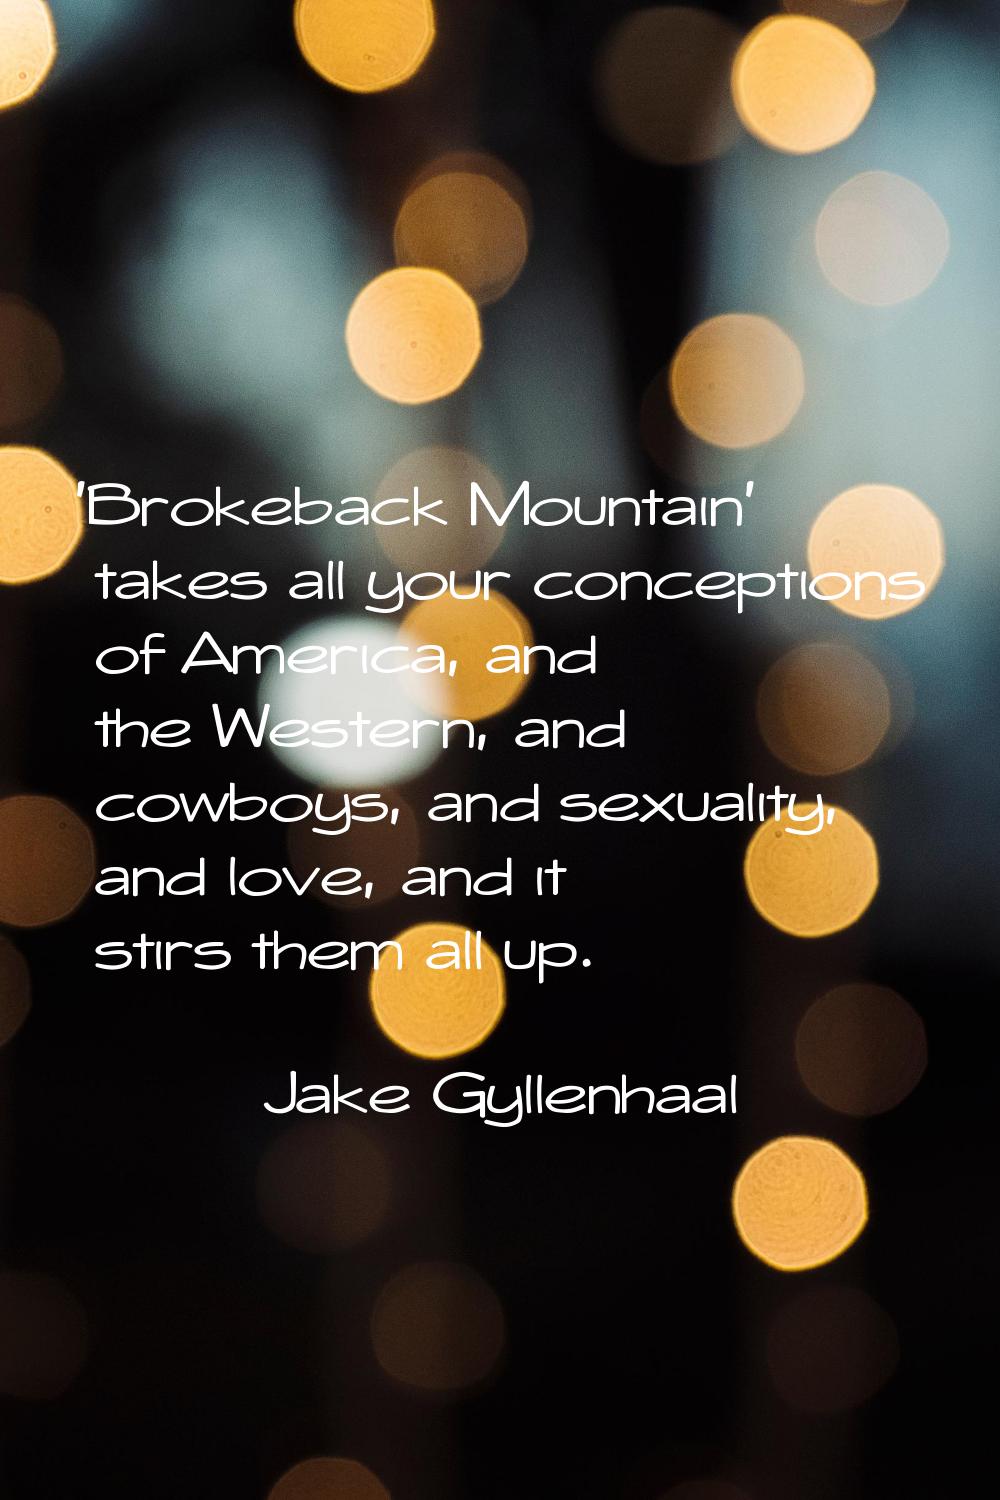 'Brokeback Mountain' takes all your conceptions of America, and the Western, and cowboys, and sexua